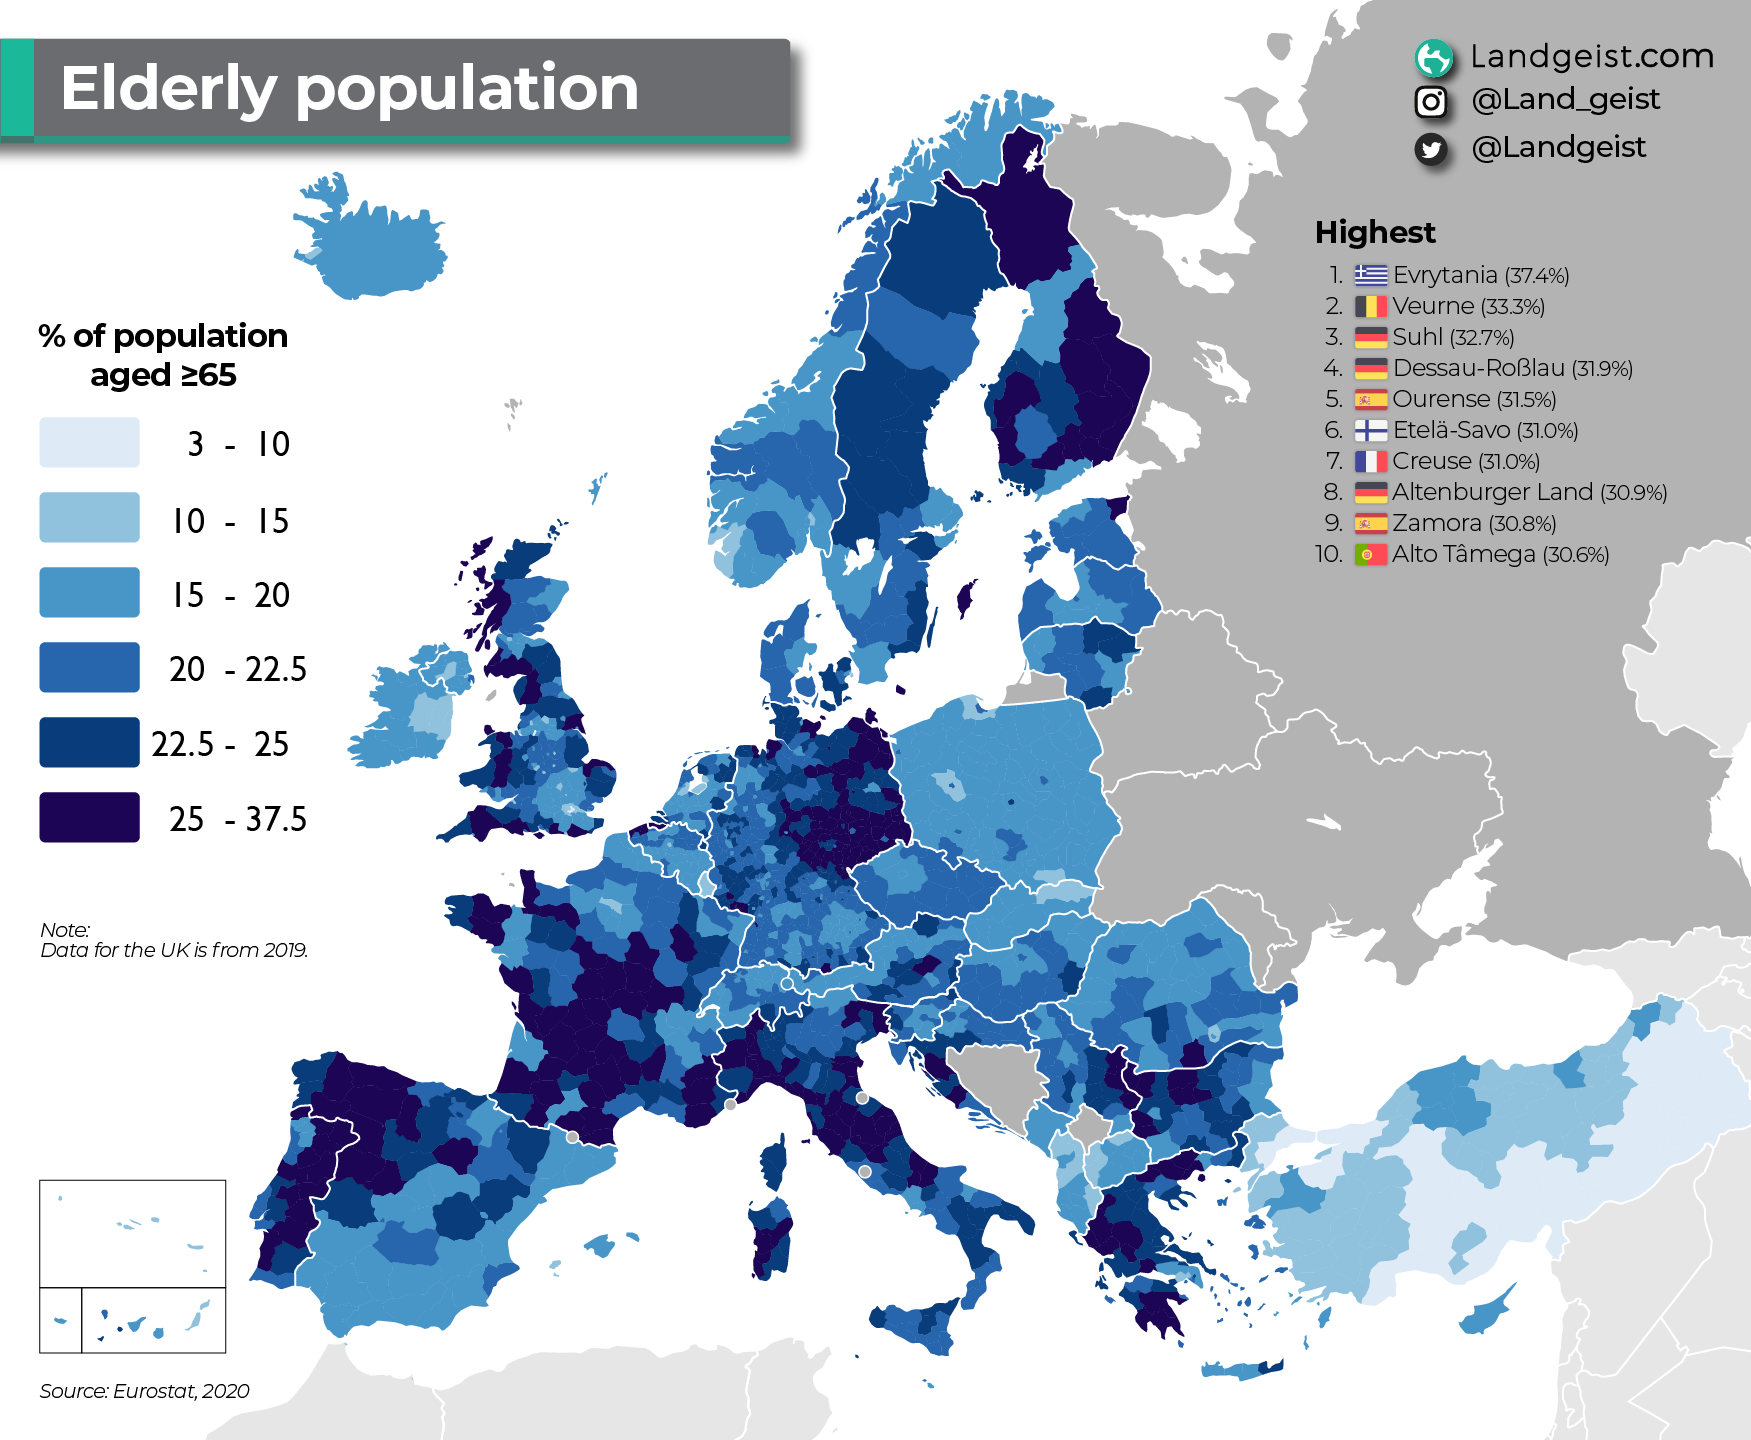 Map of the elderly population in Europe.